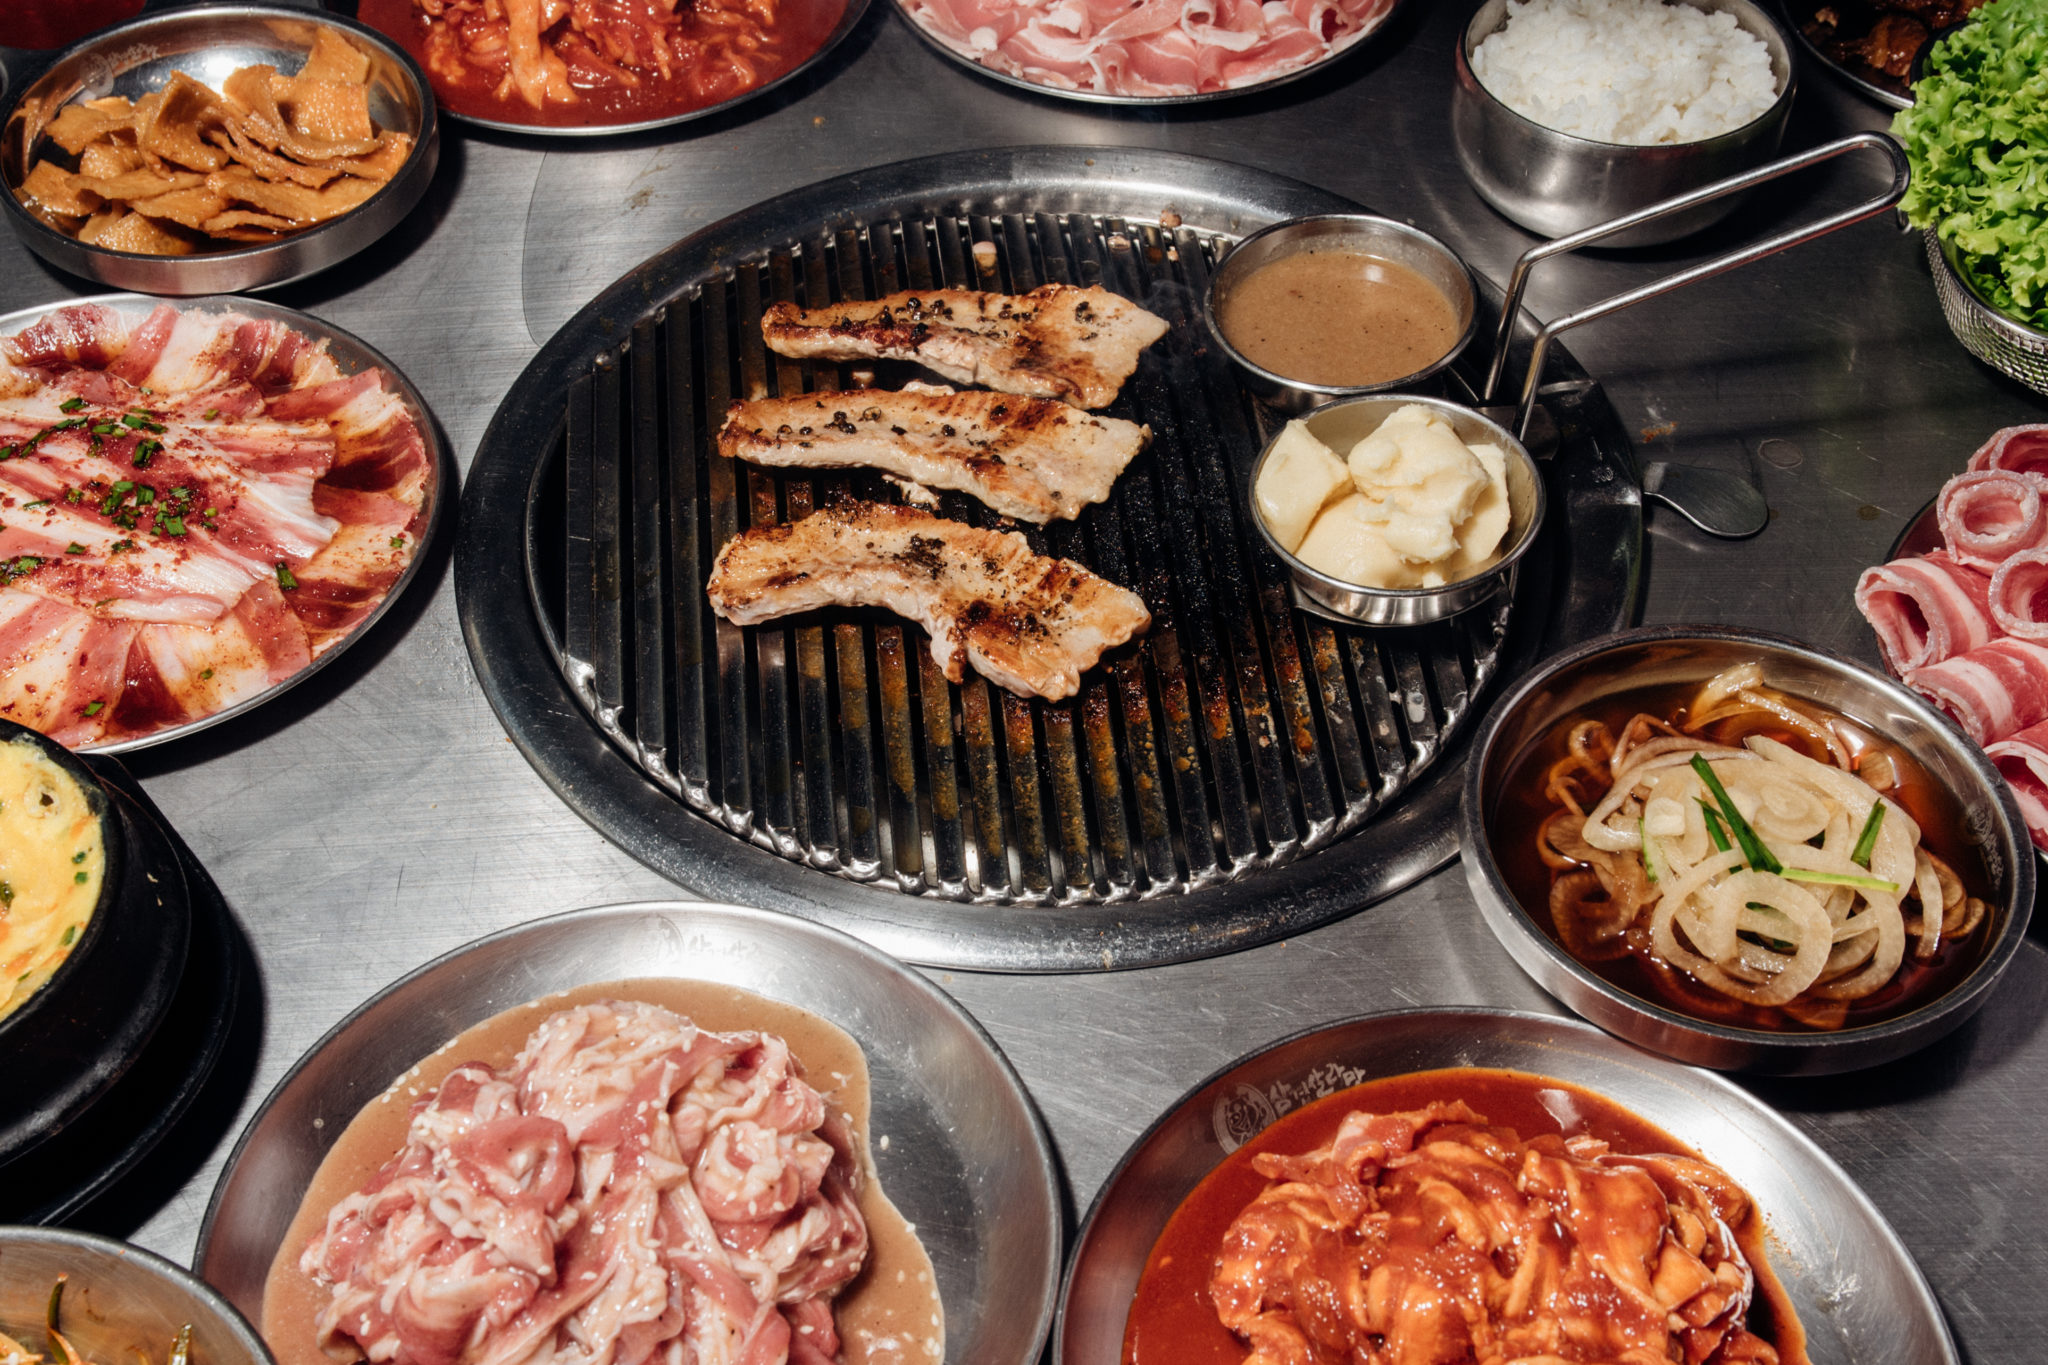 Give the unlimited Korean barbecue customer reasons to return—like new products, from cuts of meat to sides, and reliable service